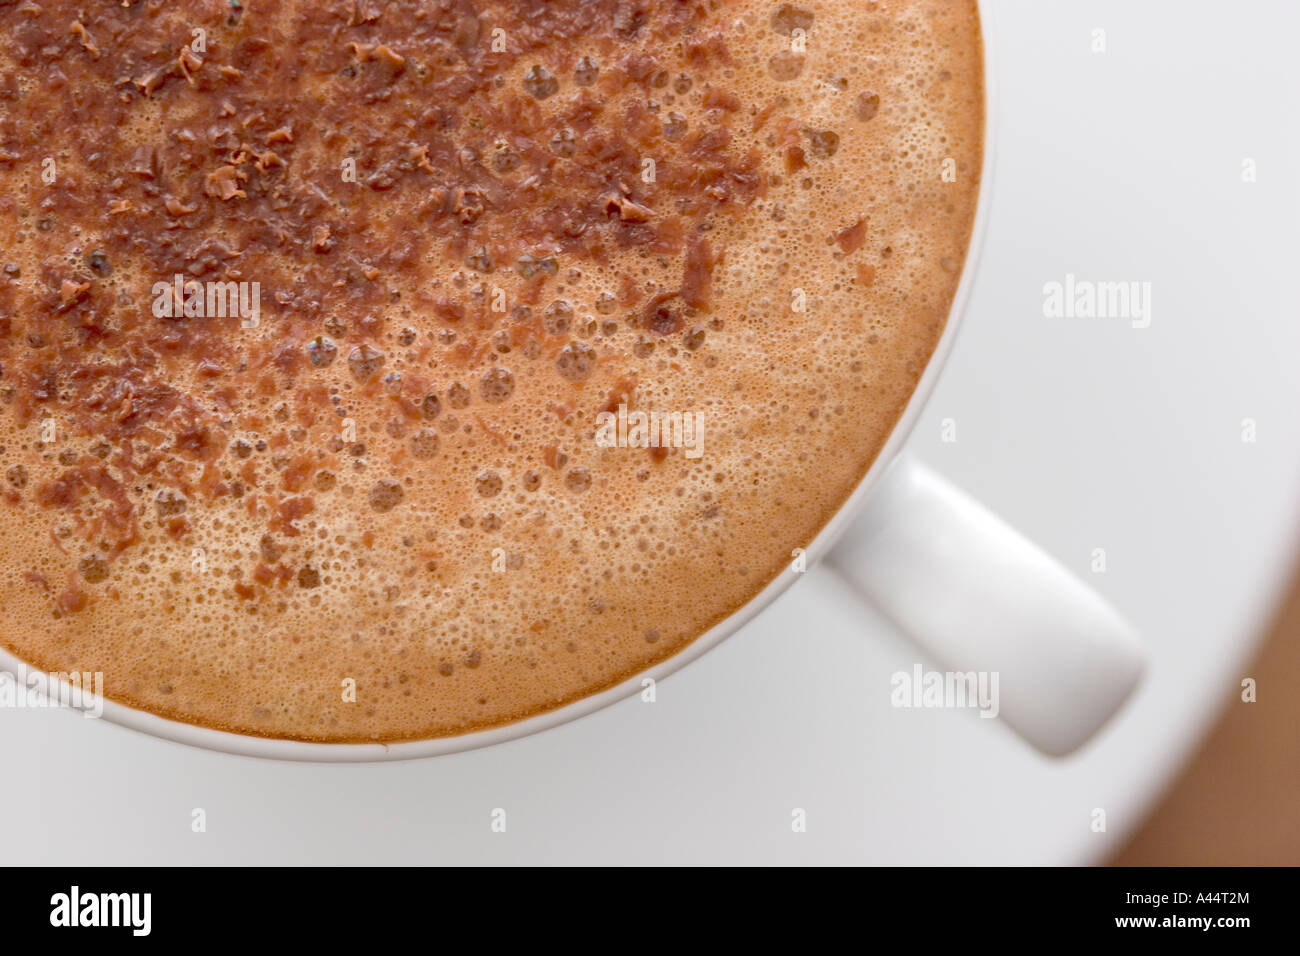 Delicious cafe mocha combines coffee and chocolate in one perfect drink Stock Photo